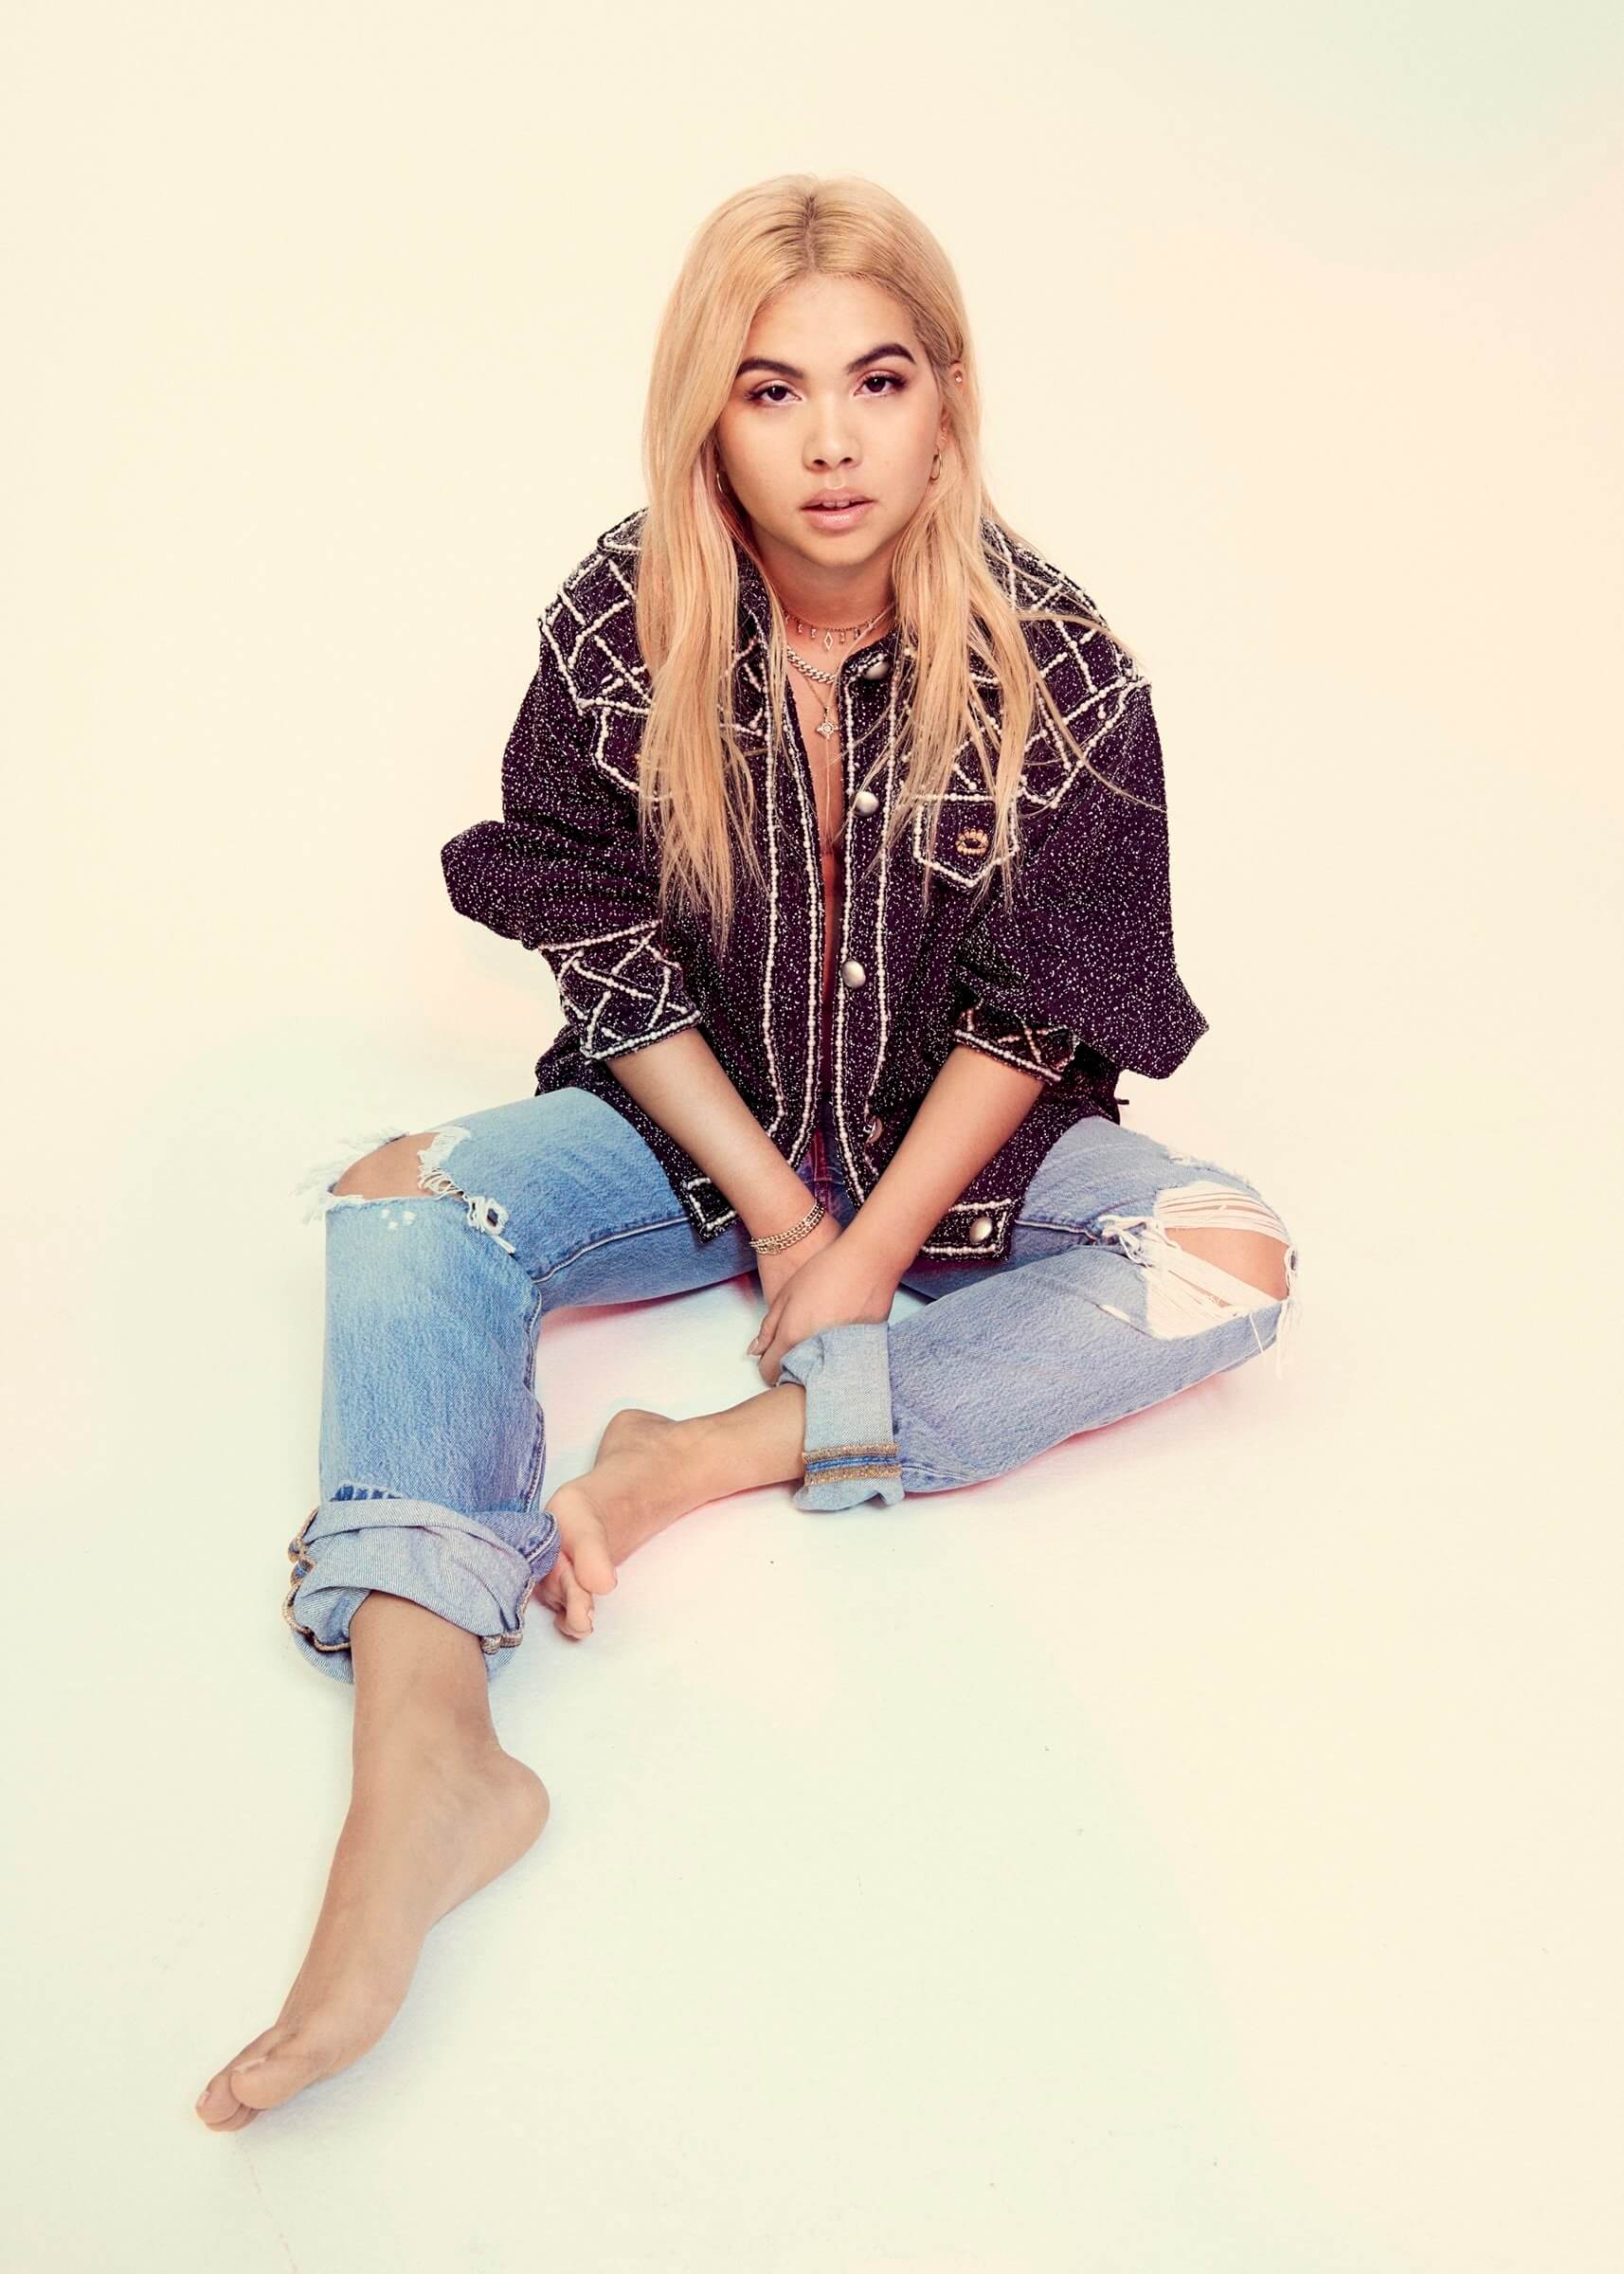 49 Hayley Kiyoko Nude Pictures Which Makes Her An Enigmatic Glamor Quotient 28